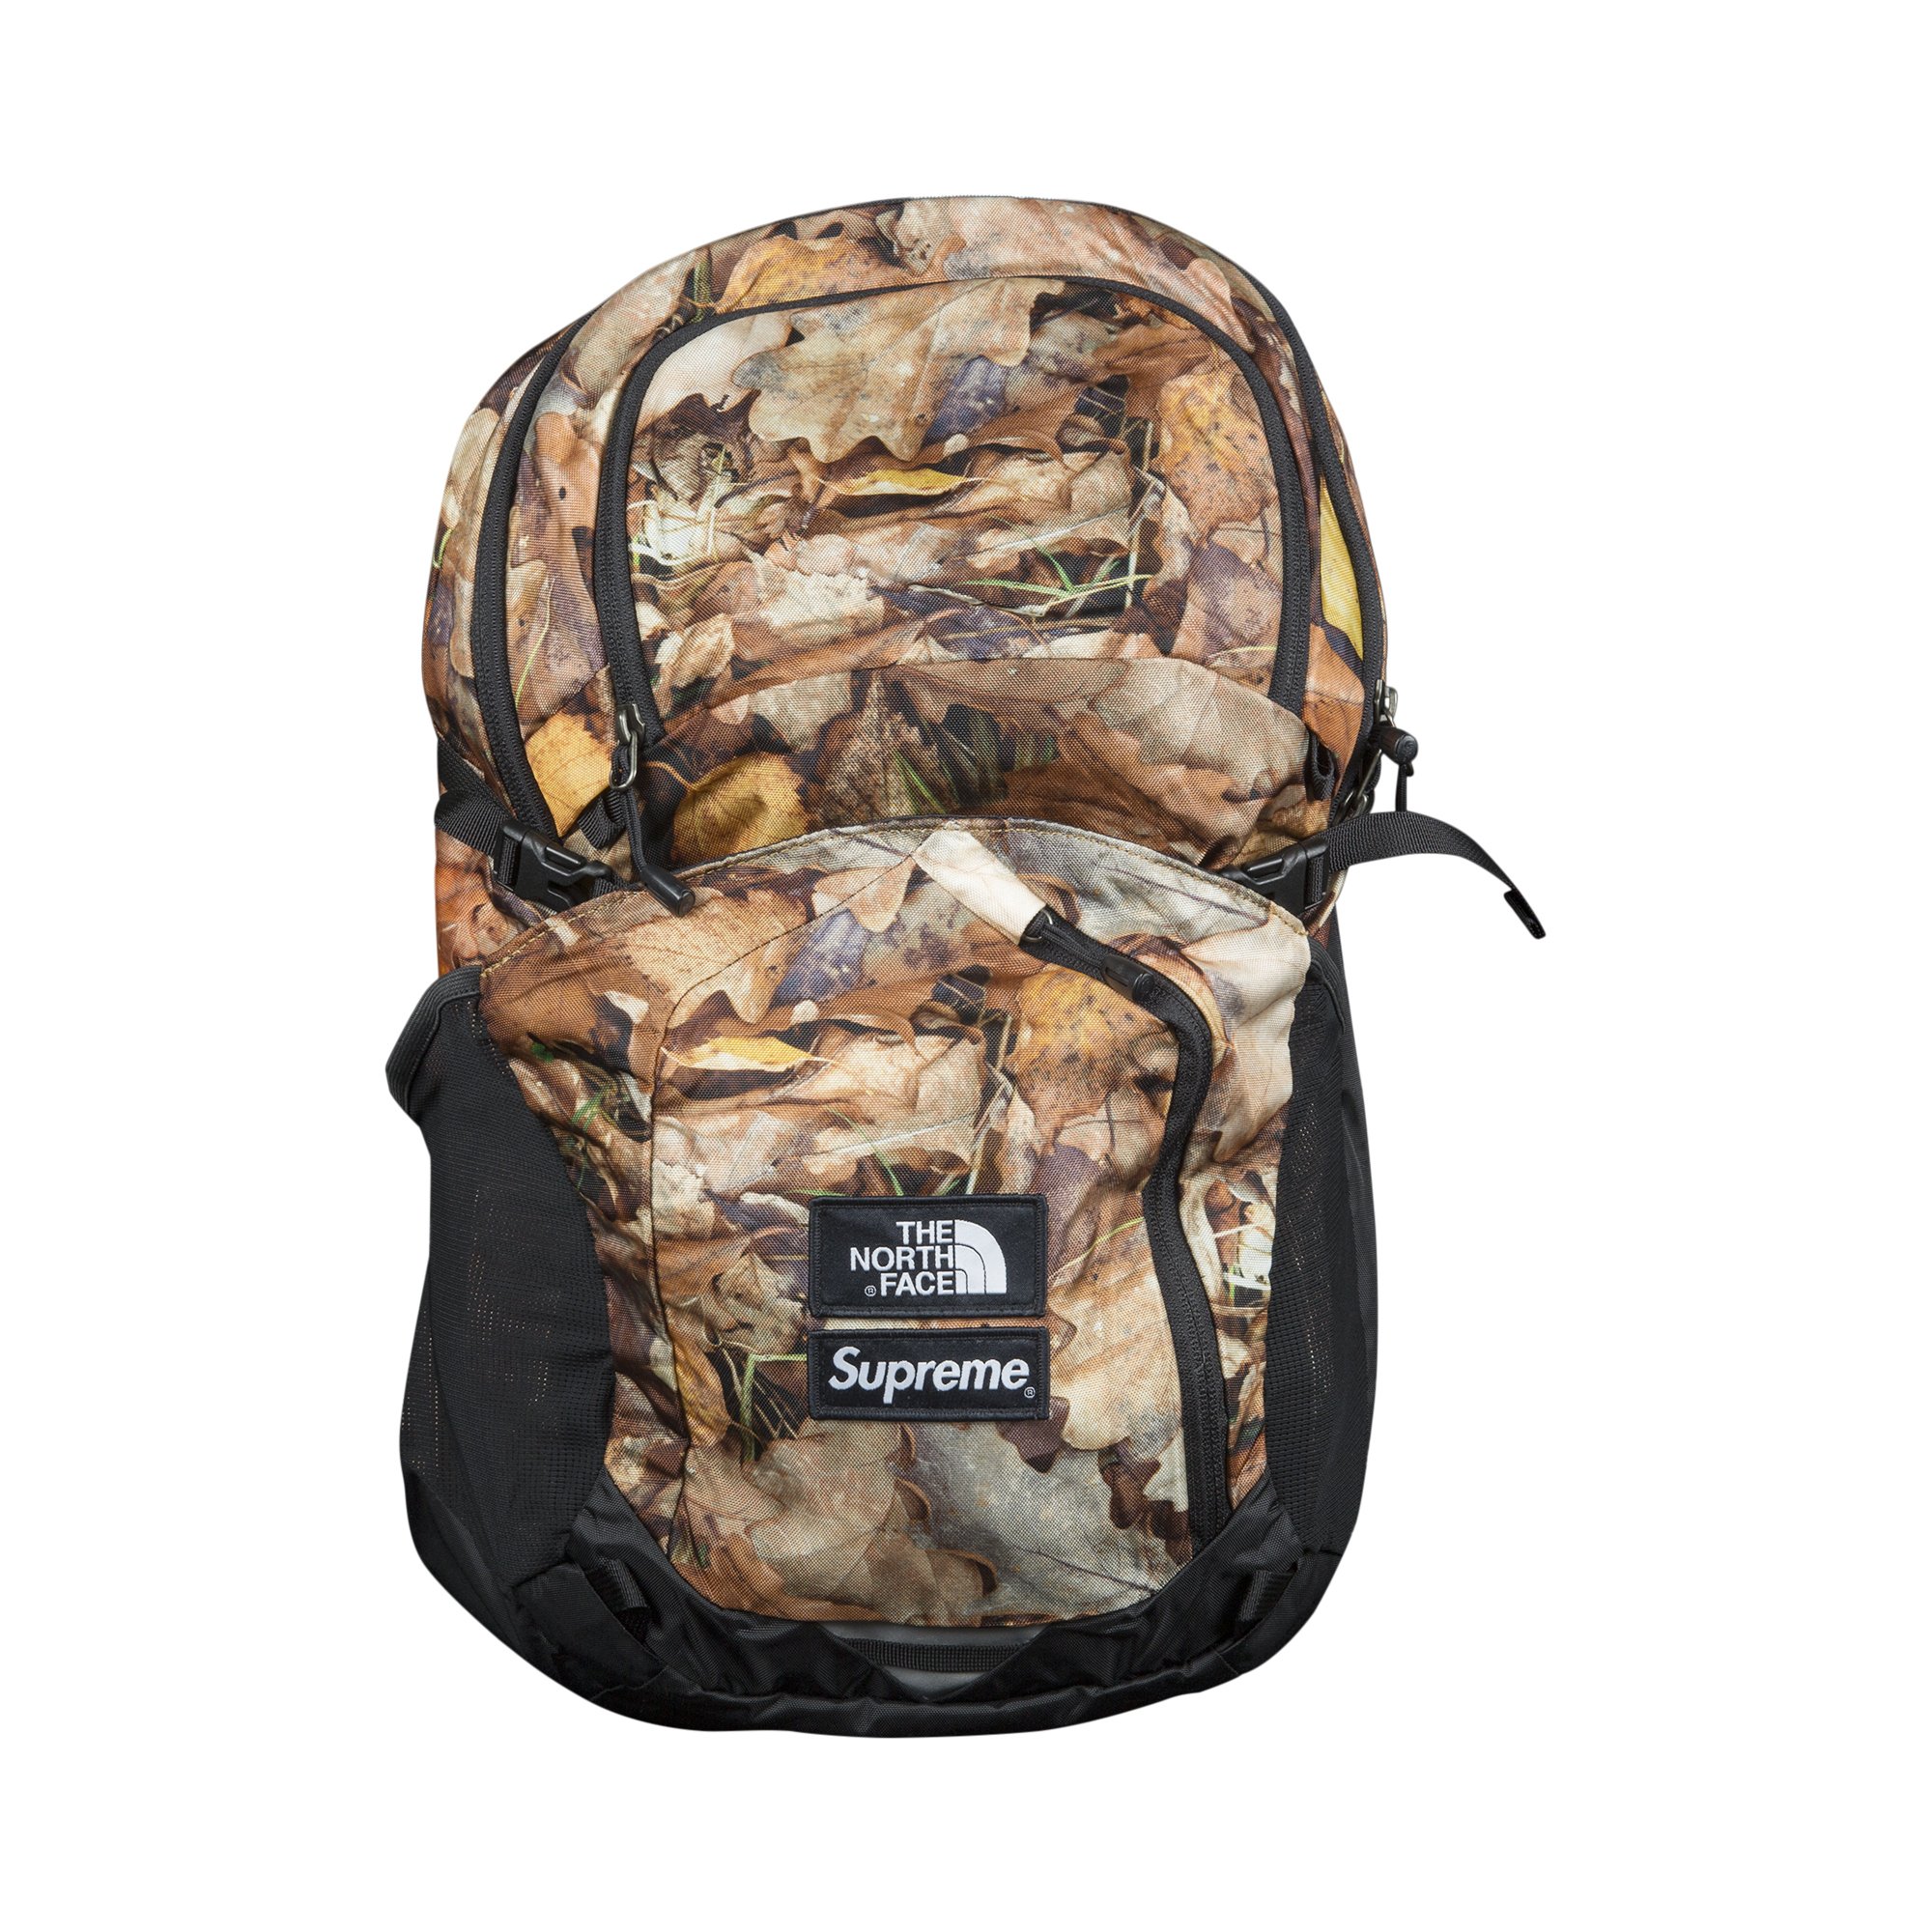 Buy Supreme x The North Face Pocono Backpack 'Leaves' - FW16B1 